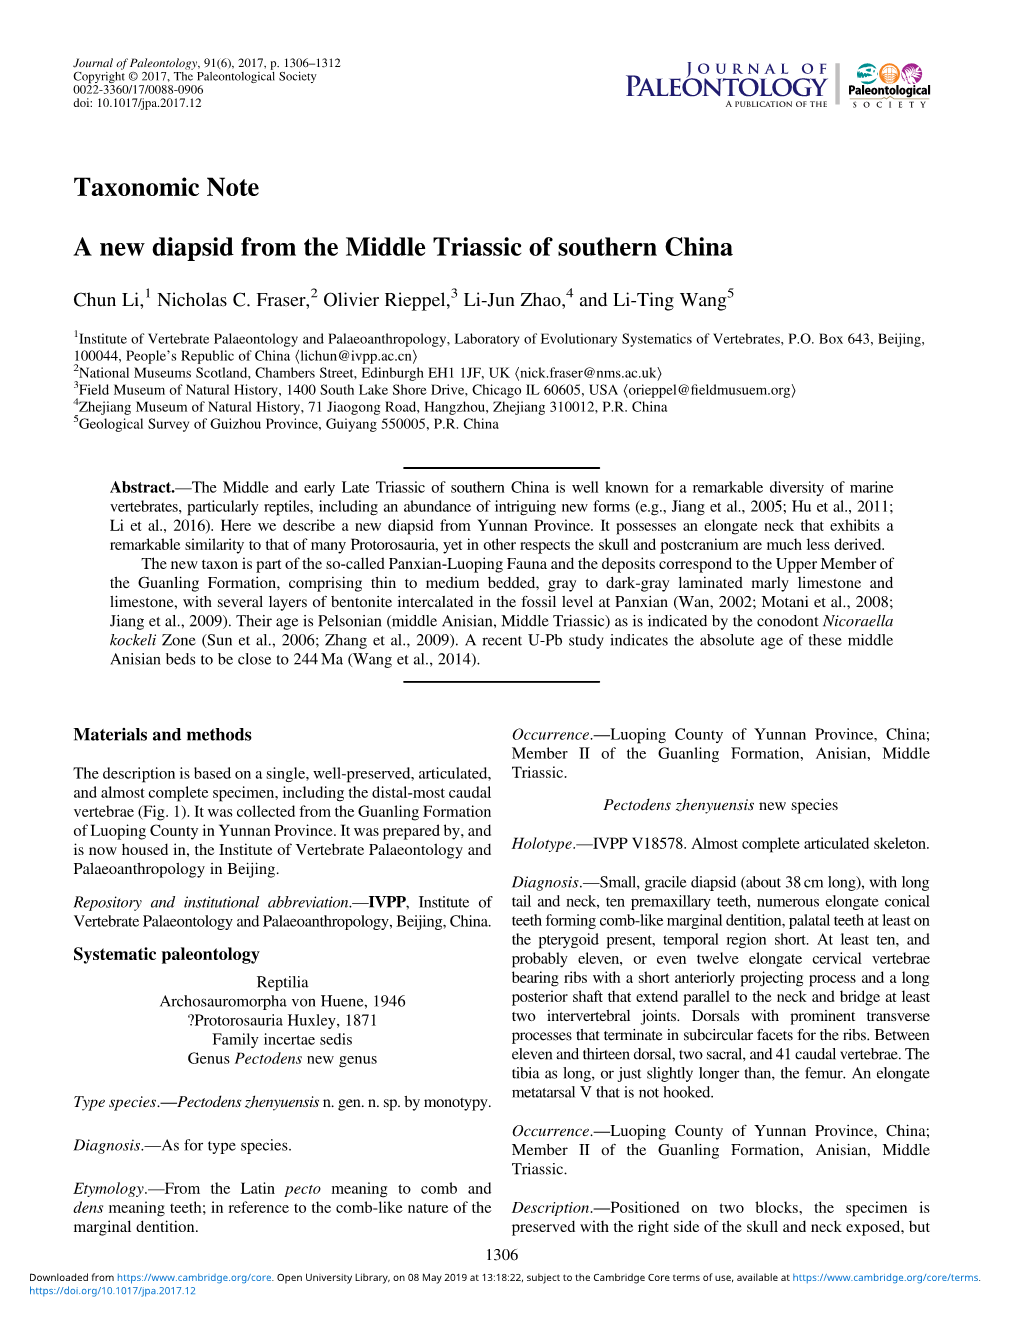 Taxonomic Note a New Diapsid from the Middle Triassic of Southern China